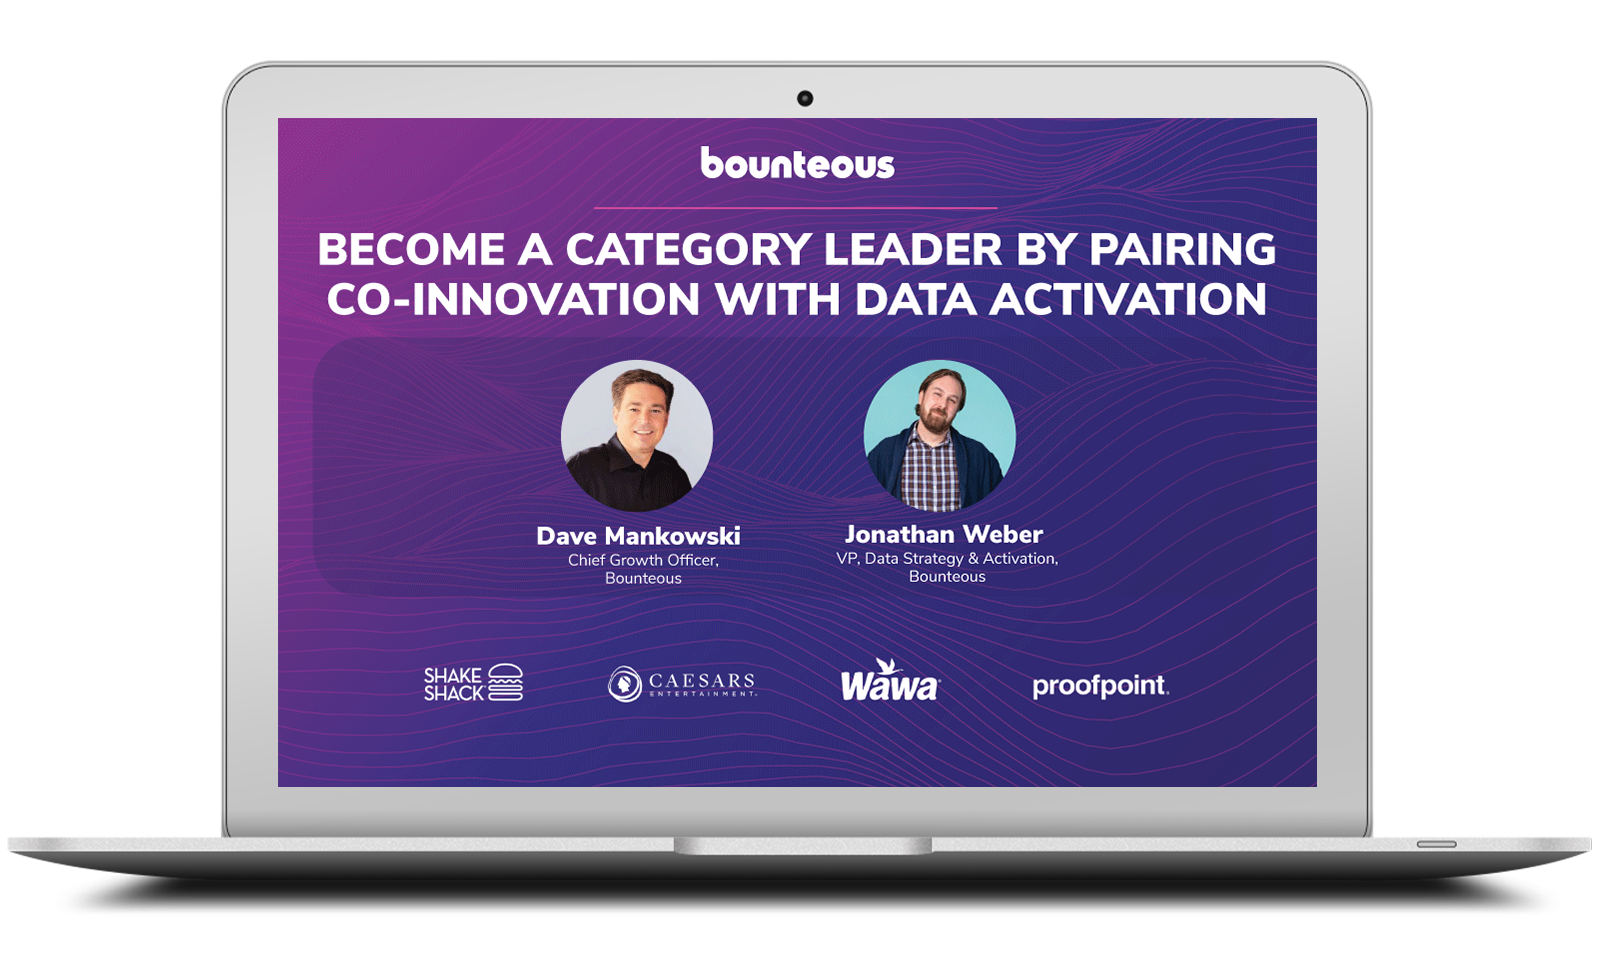 Become a Category Leader by Pairing Co-innovation With Data Activation